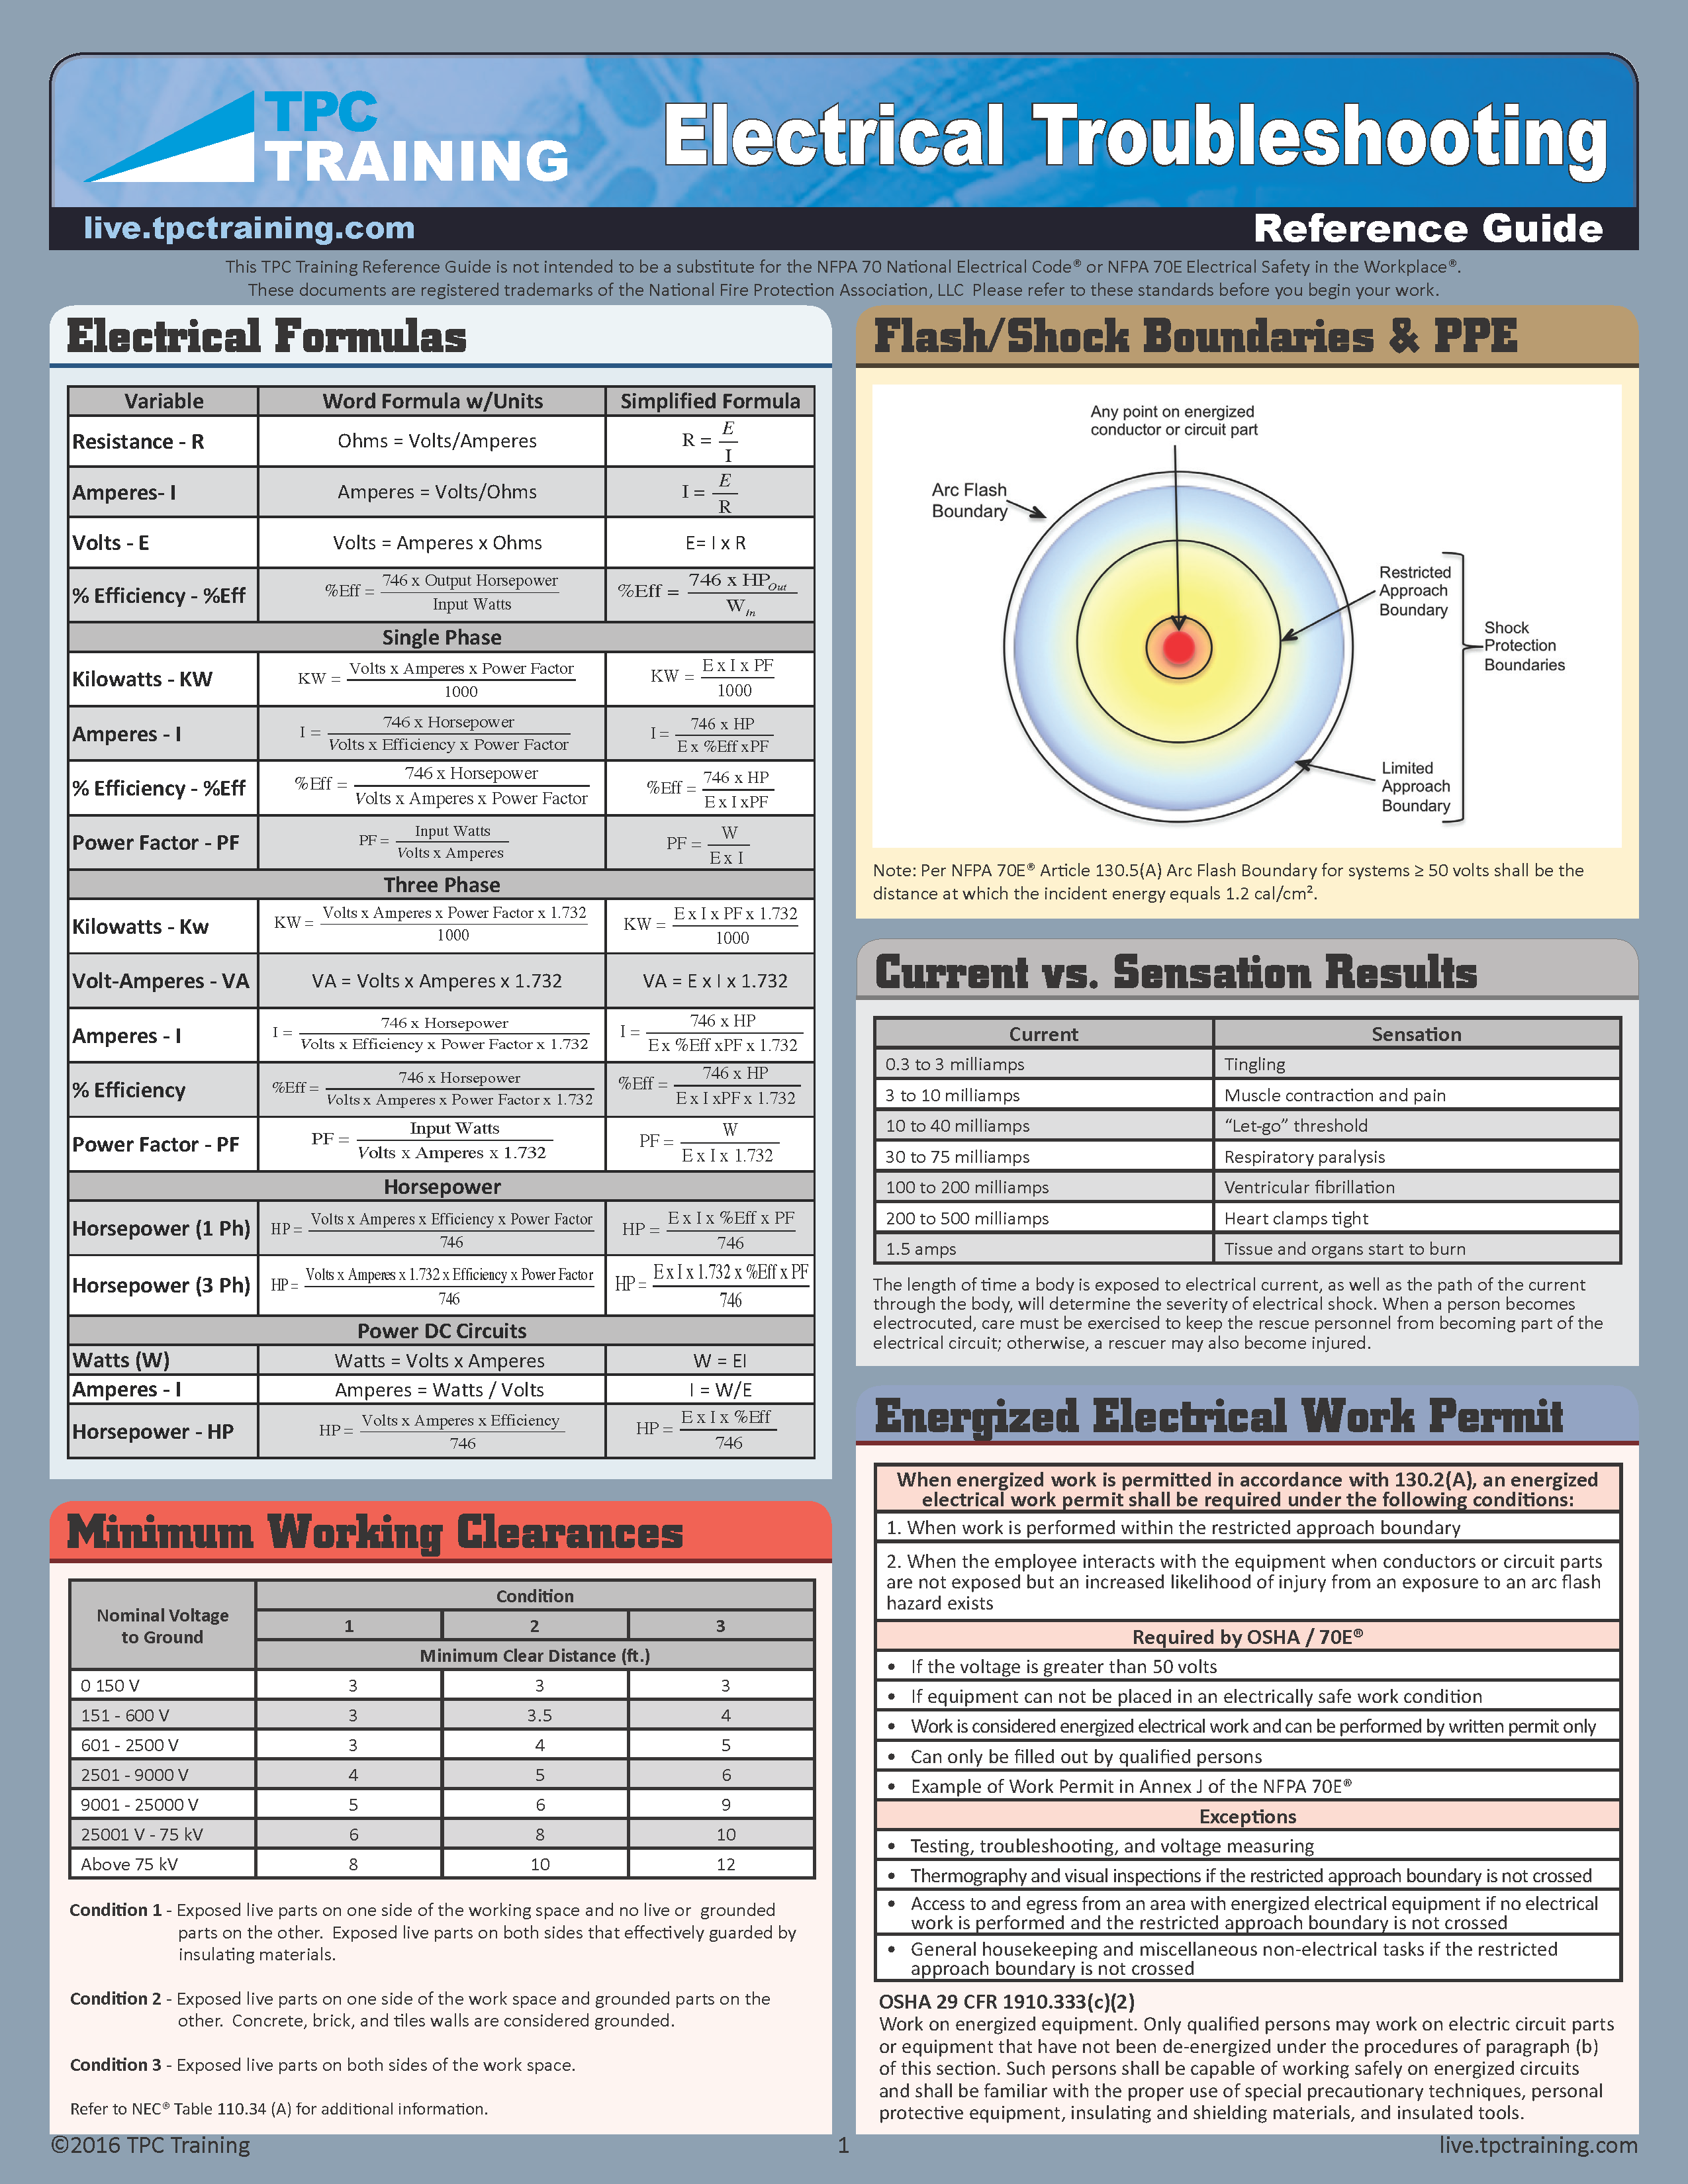 Electrical Troubleshooting Quick Reference Guide